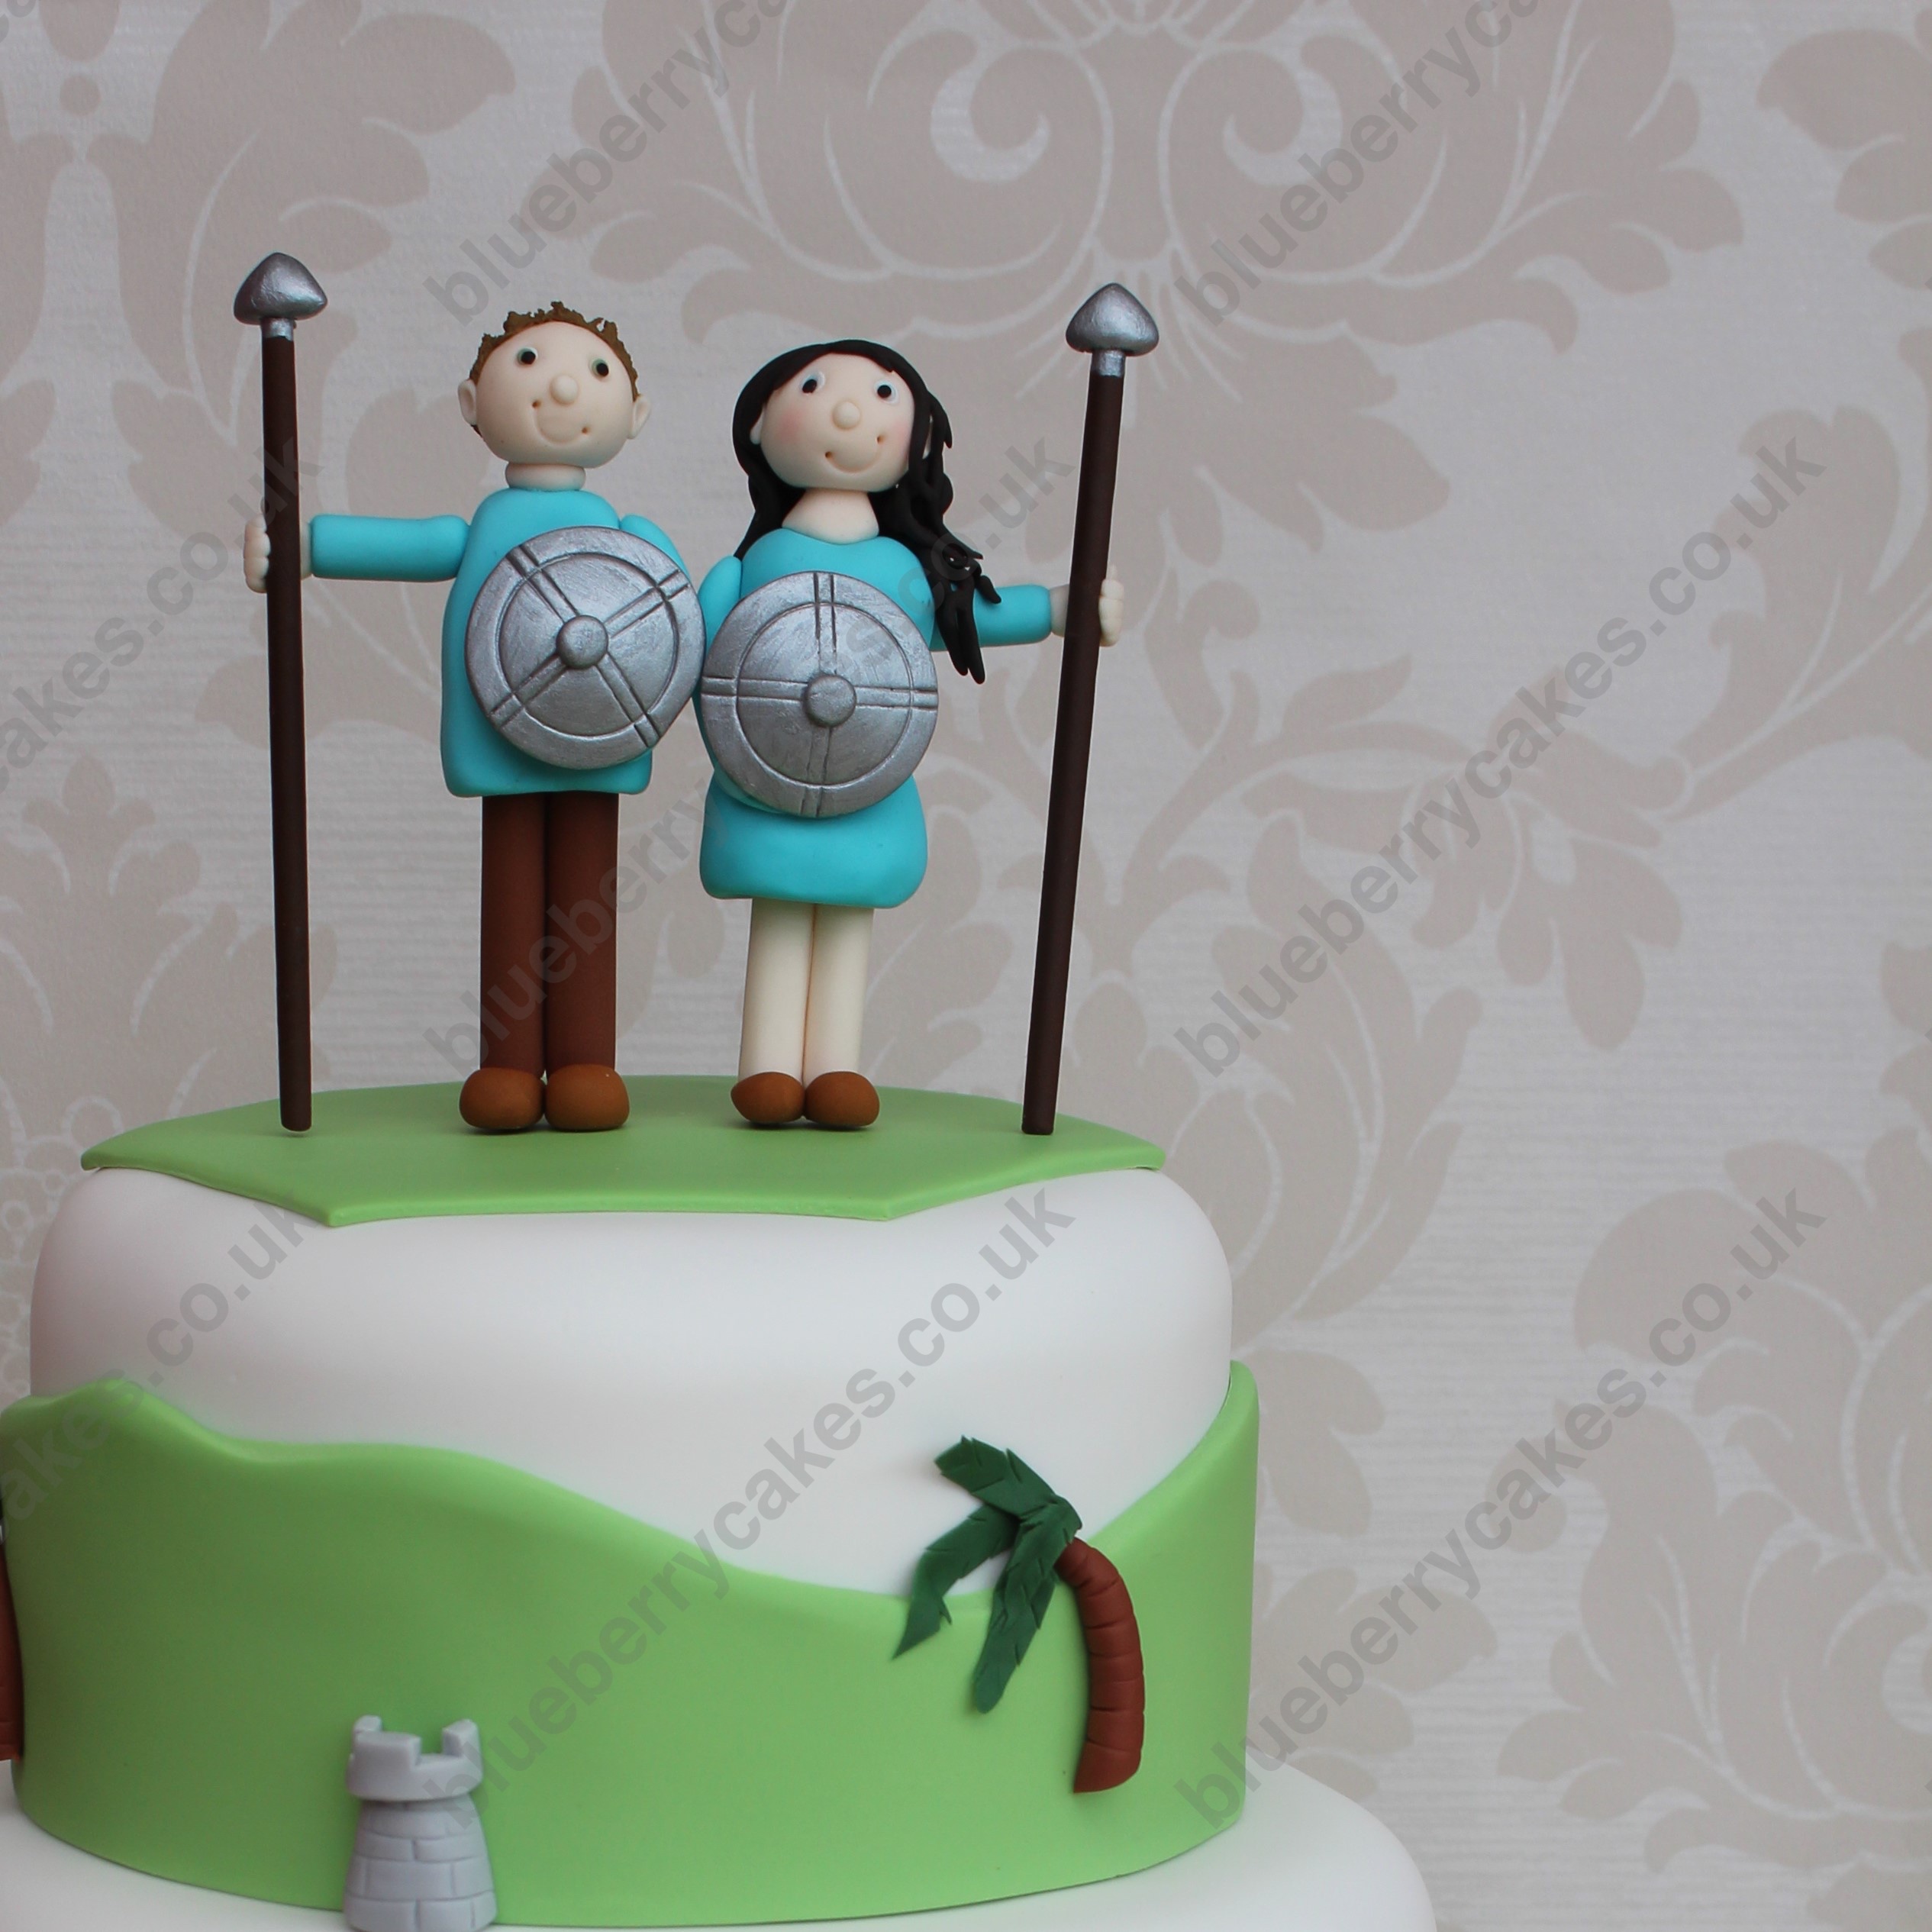 Cake Toppers – Blueberry Cakes